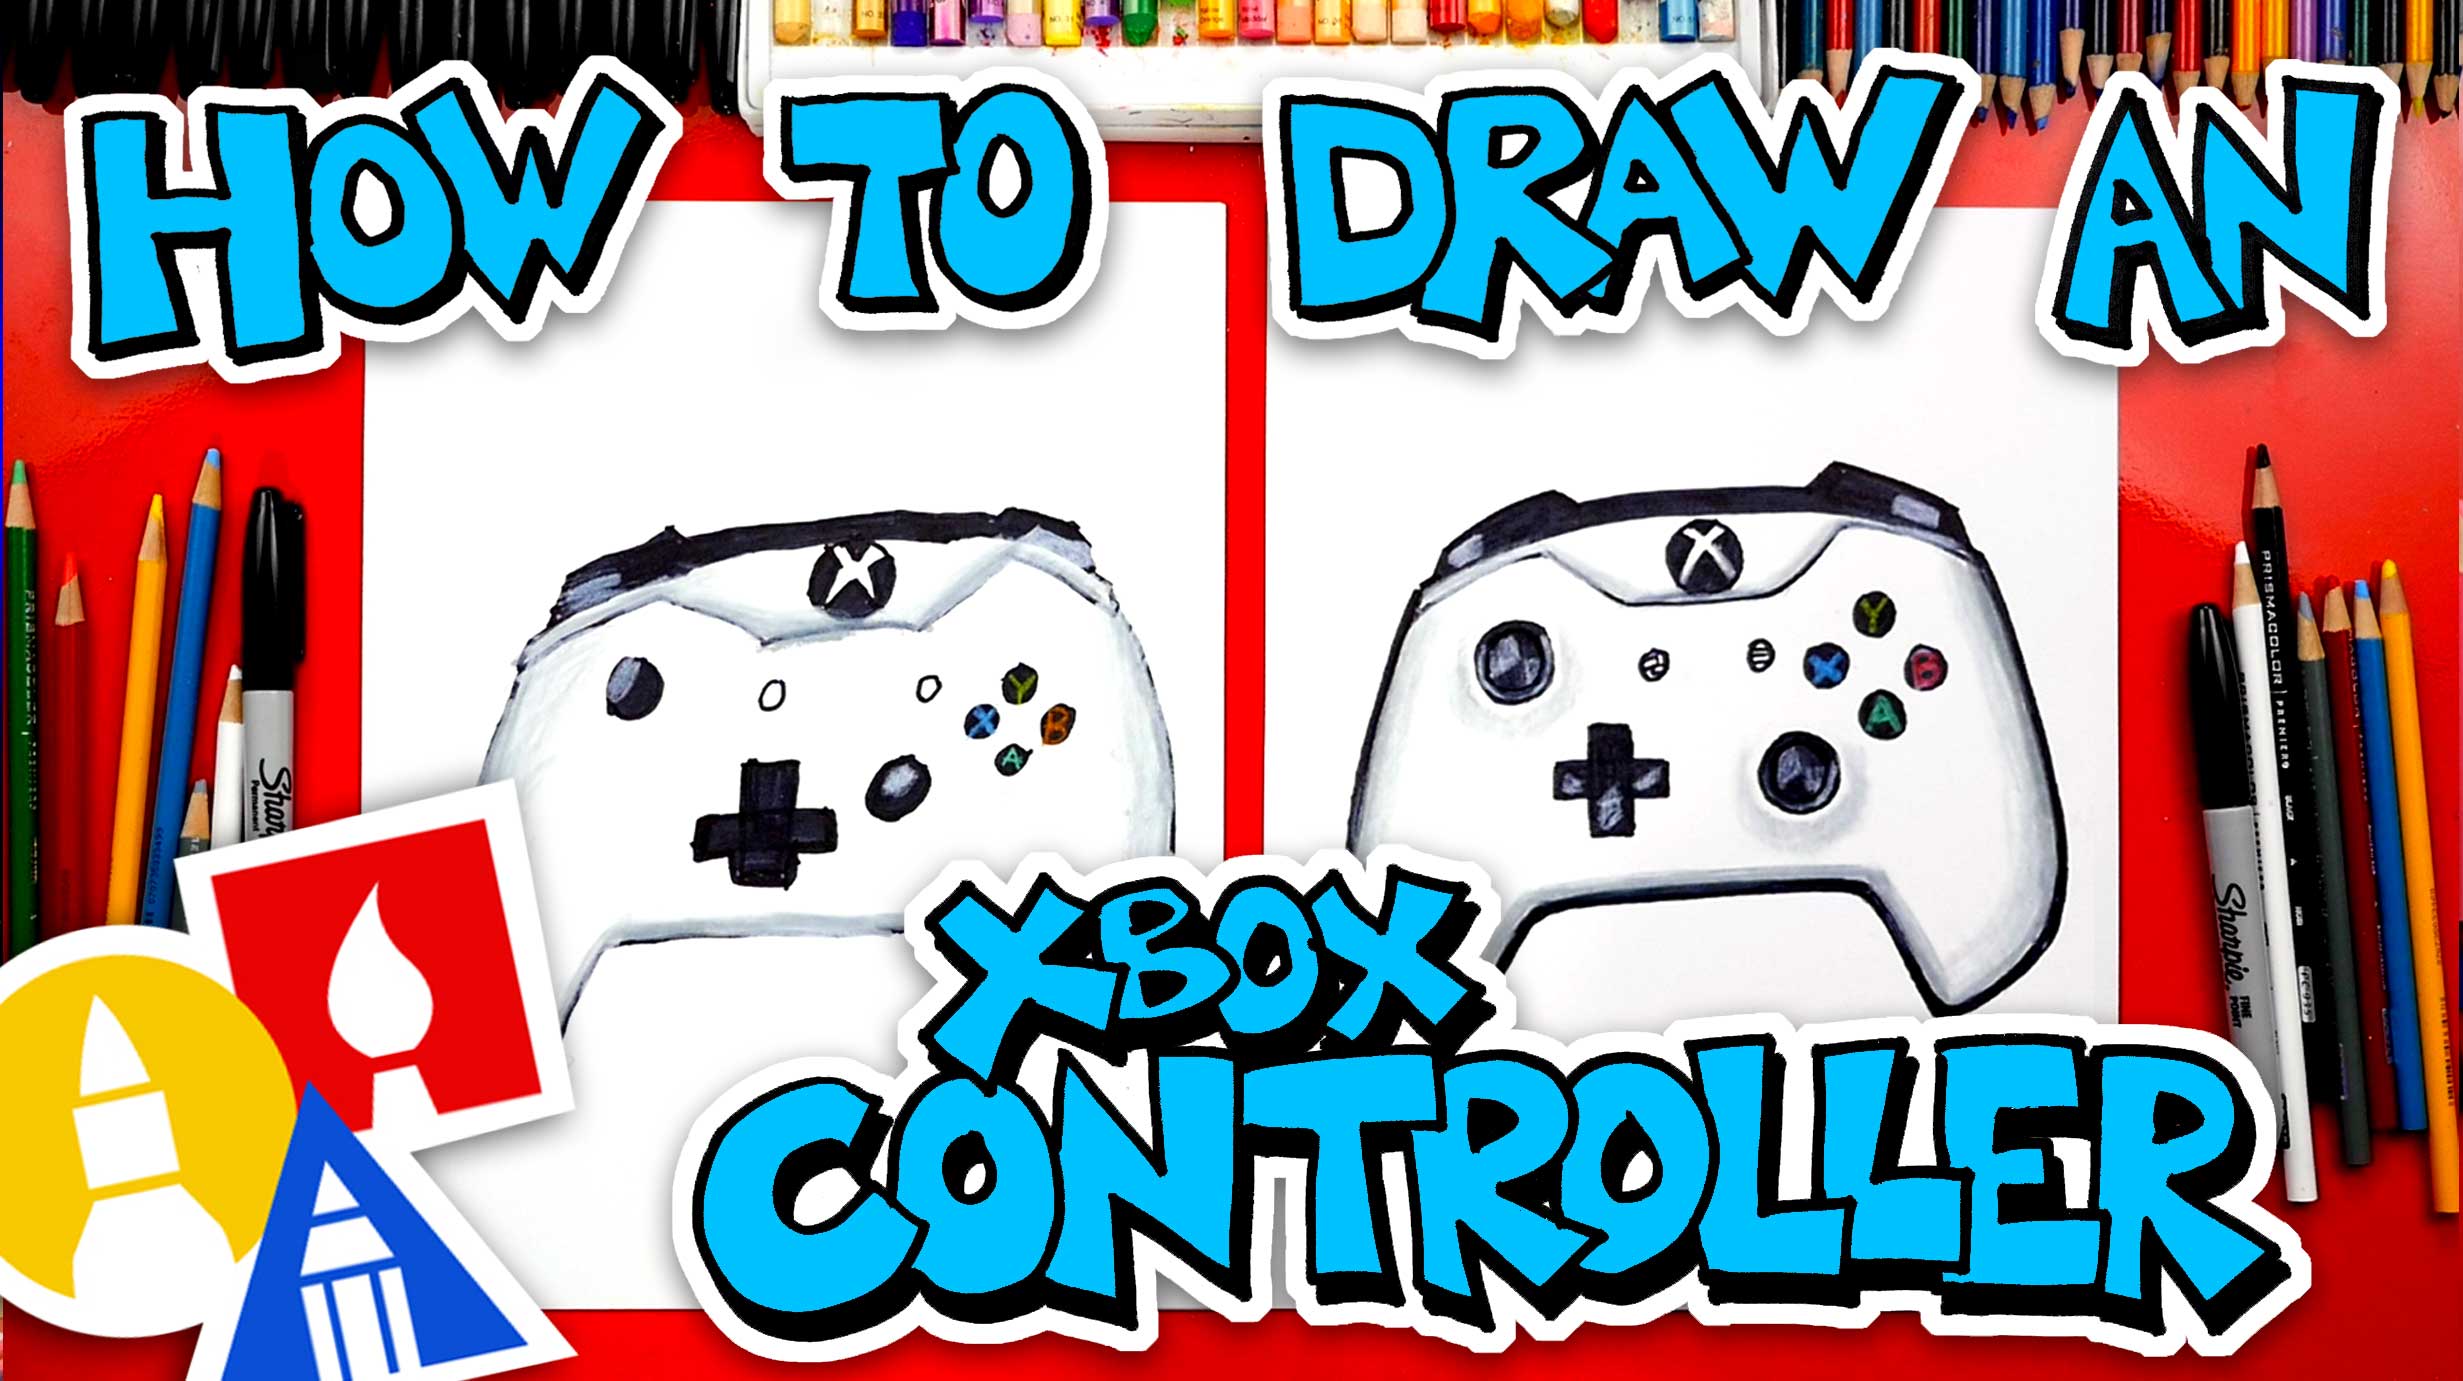 How To Draw An Xbox Controller Art For Kids Hub Package drawings for controllers (show all). how to draw an xbox controller art